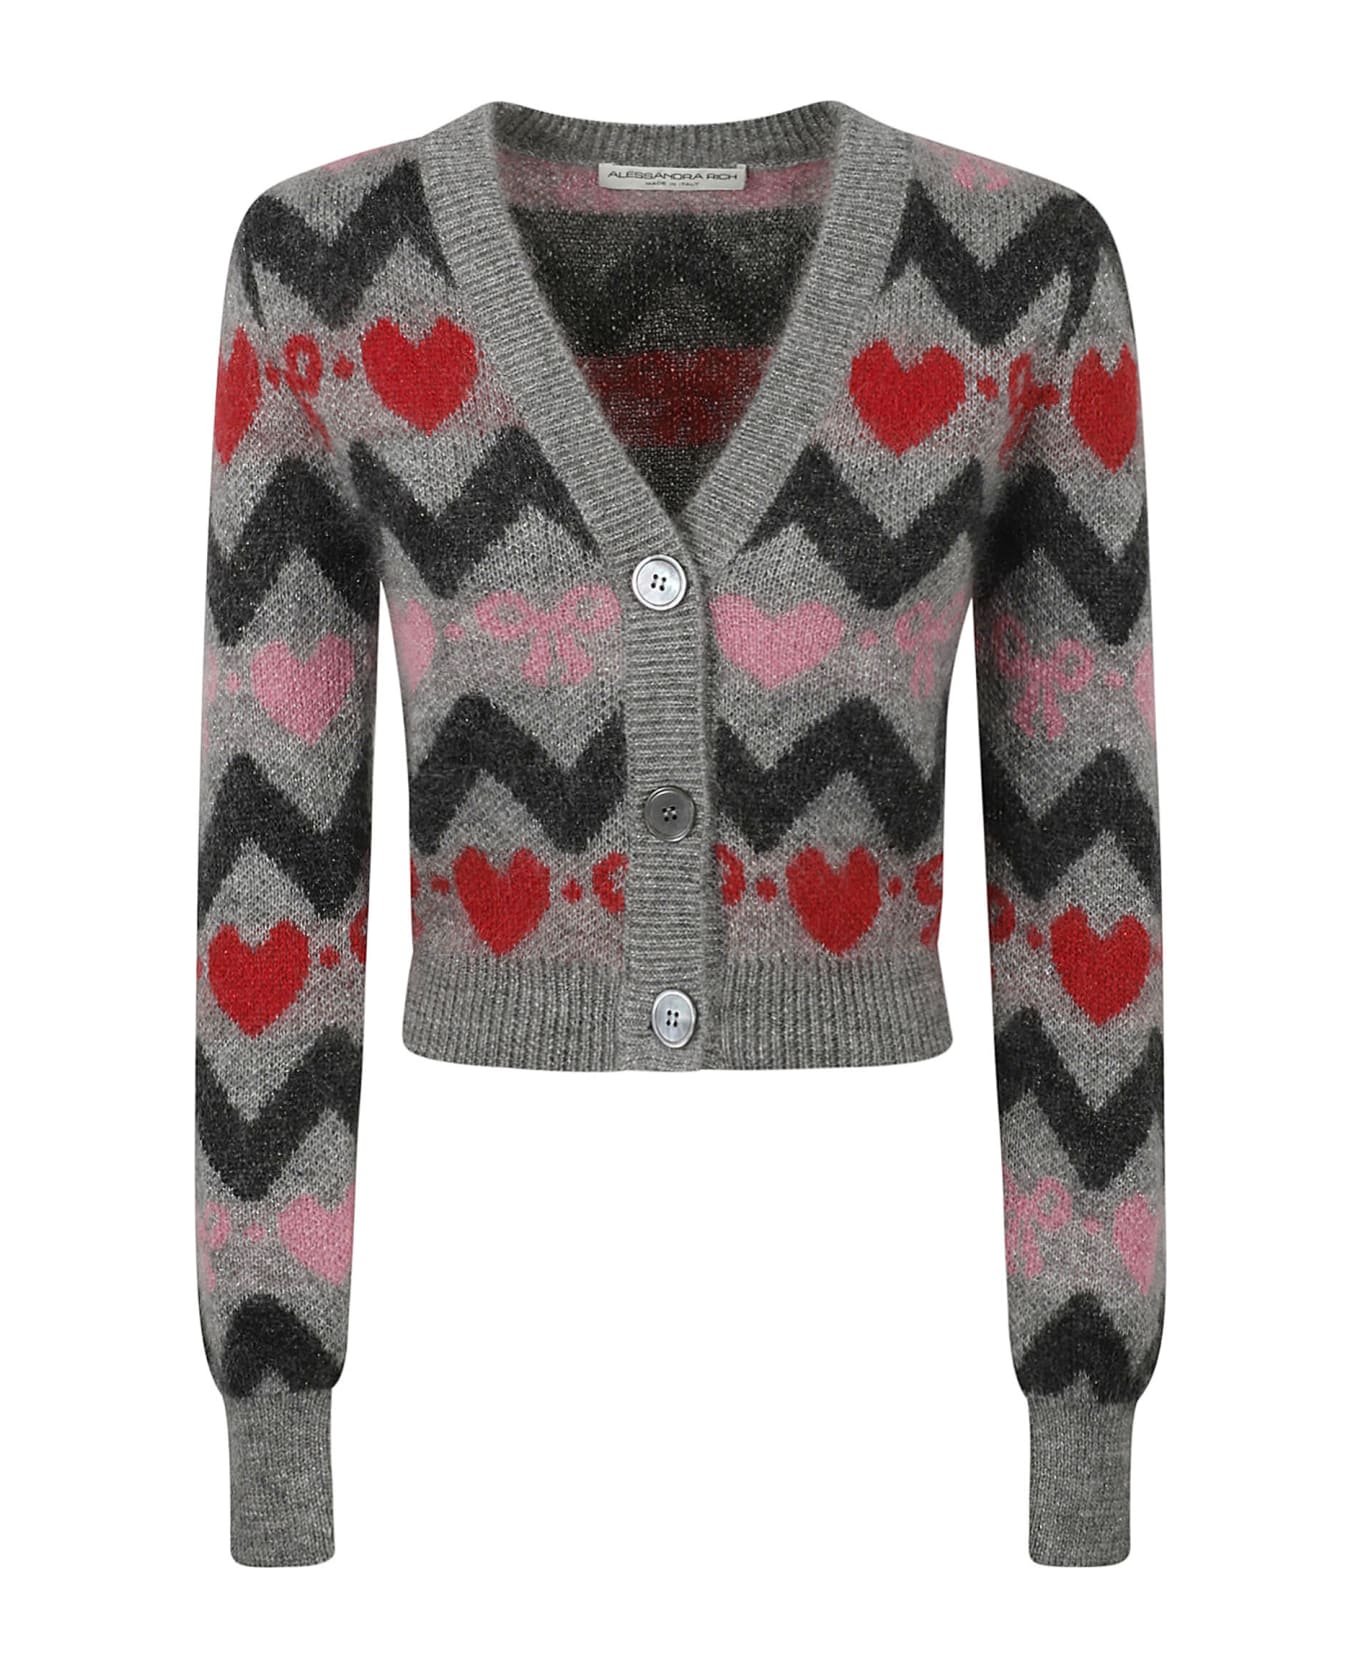 Alessandra Rich Knitted Mohair Cardigan - Grey